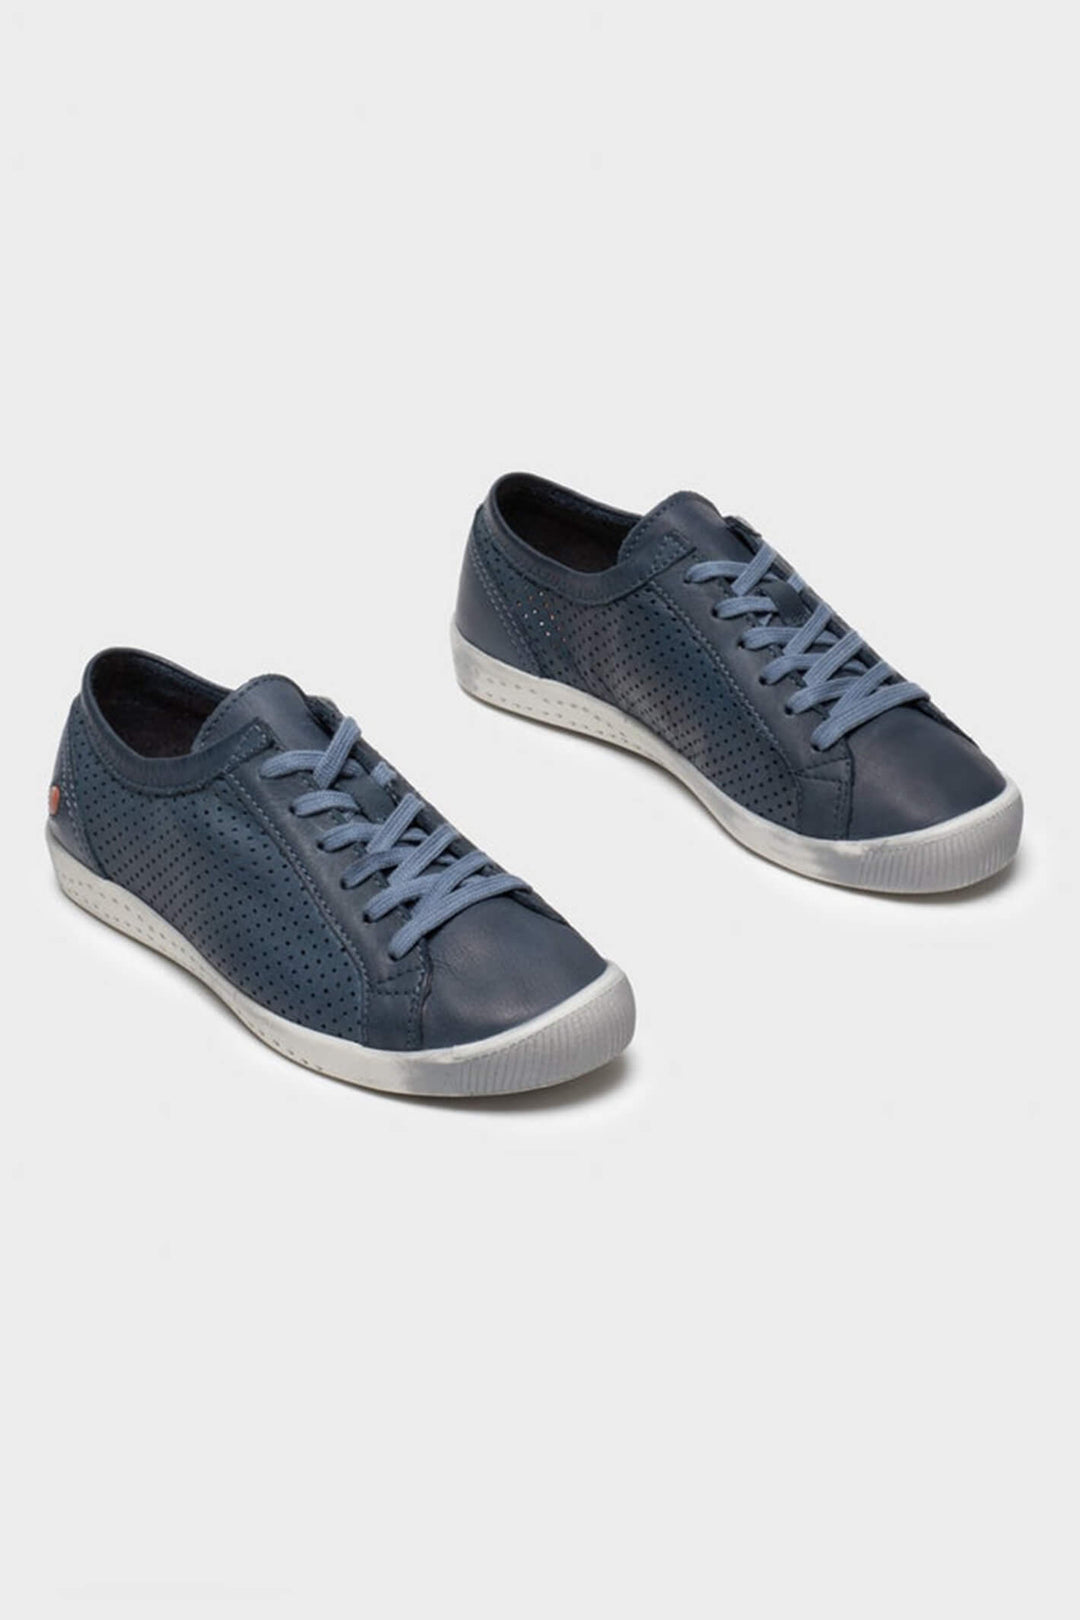 Softinos ICA388SOF Smooth Navy Lace Up Leather Trainers - Shirley Allum Boutique